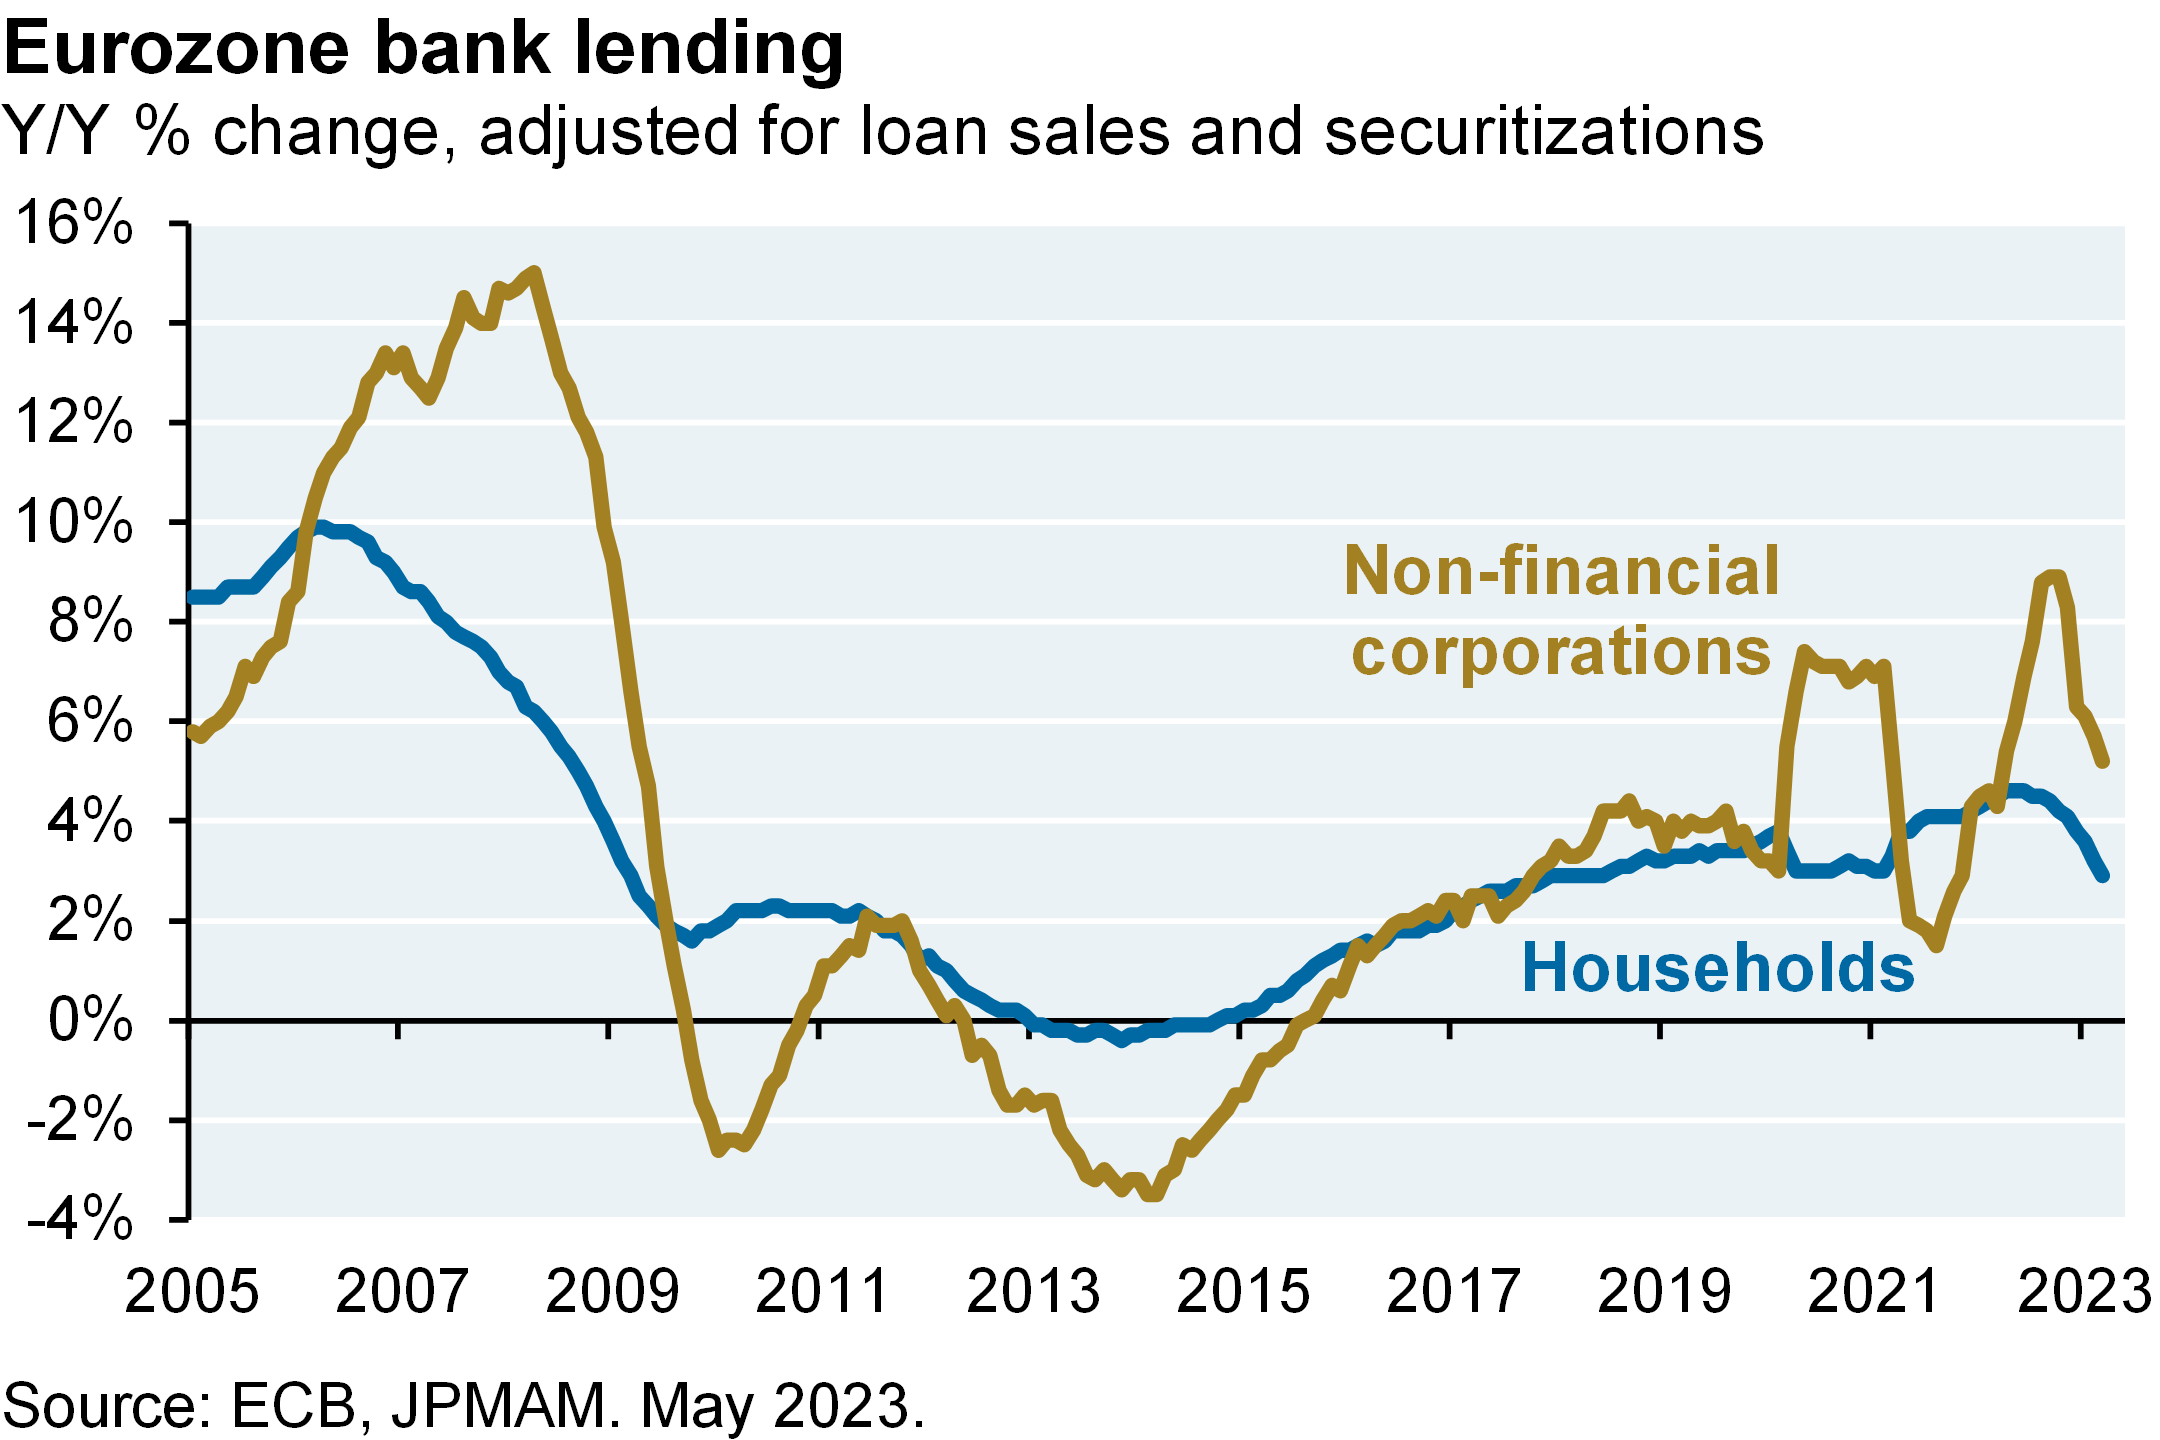 Line chart plots the year-over-year percent change in Eurozone bank lending from 2005 to present for both lending to non-financial corporations and to households. Neither lending activity has recovered from 2005-2007 levels.